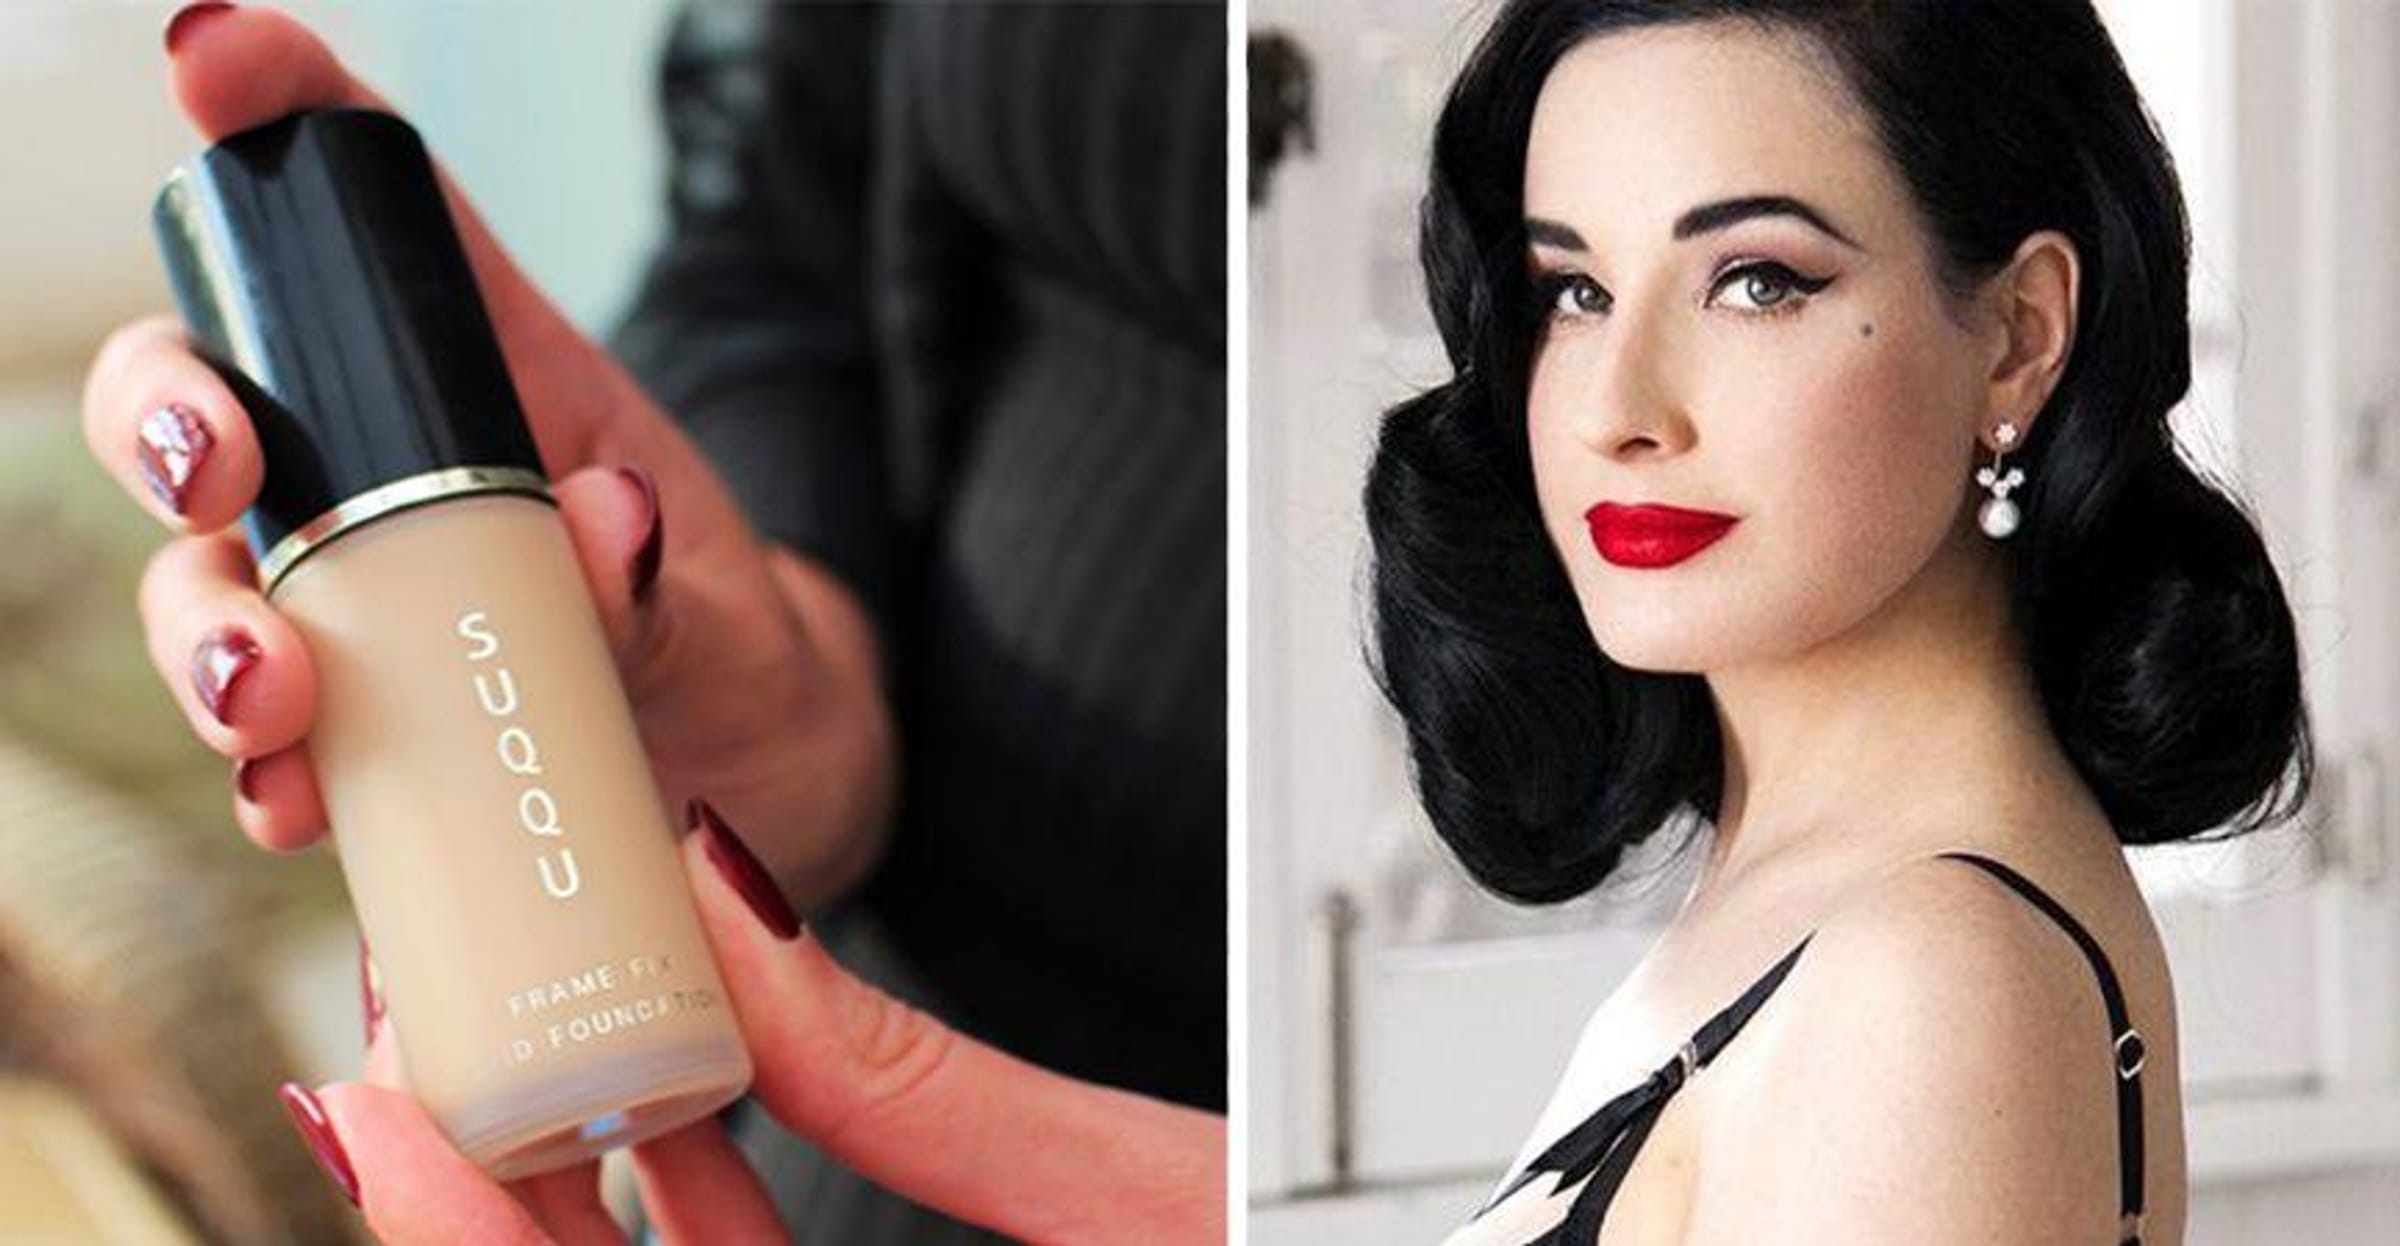 The 15 Best Makeup Products To Get That Pin Up Look